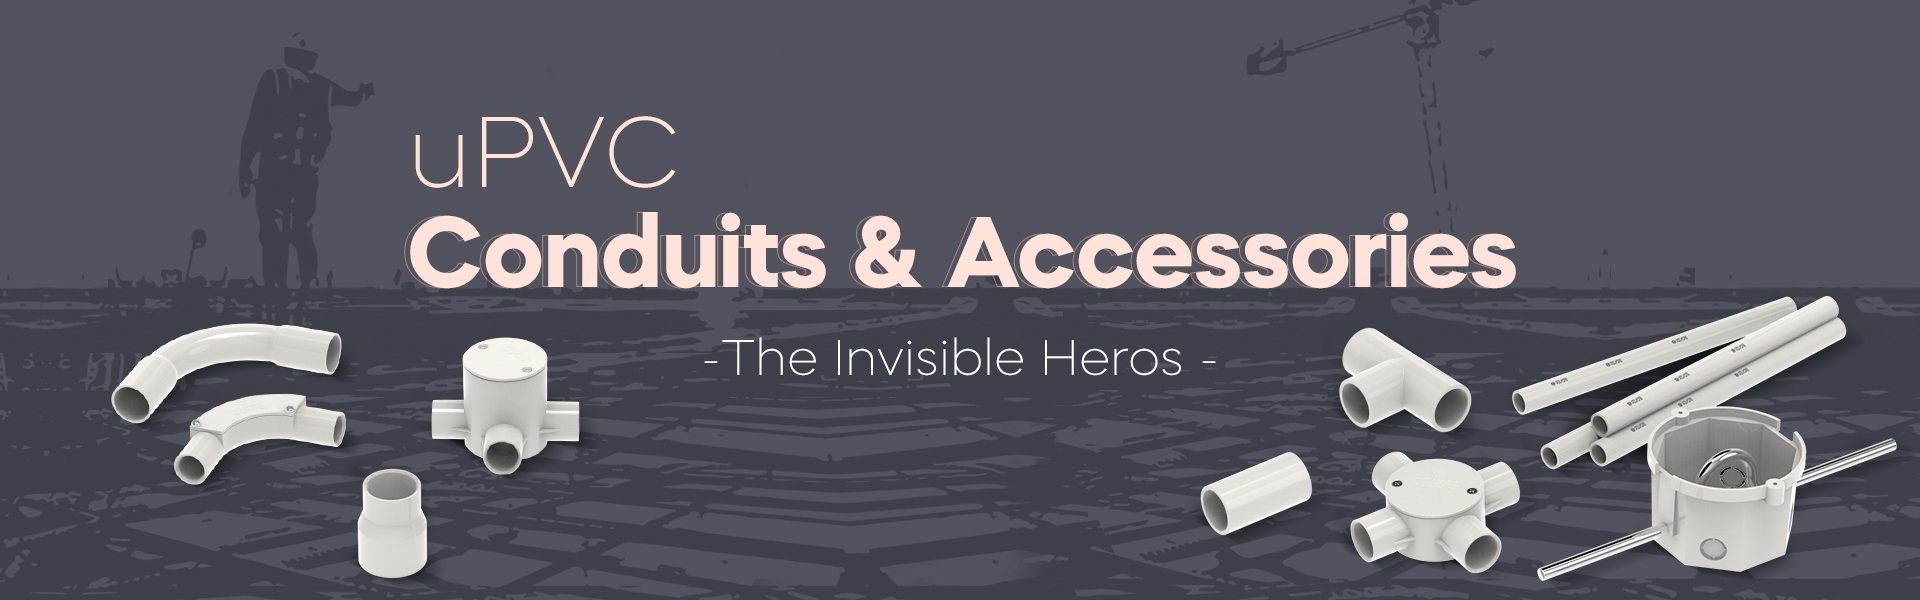 Polycab UPVC conduits and accessories the invisible heroes